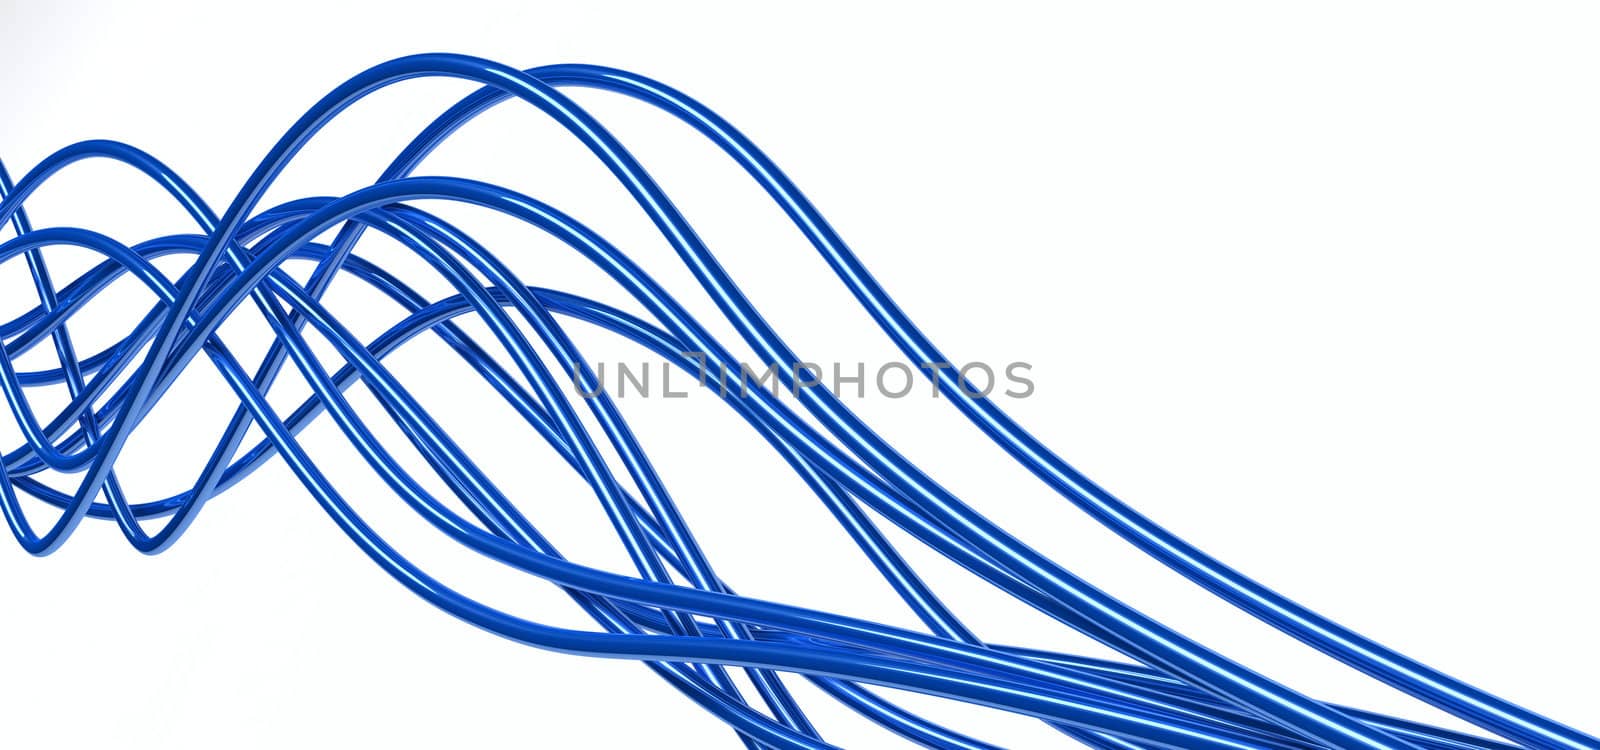 bright metallic fibre-optical blue cables on a white background